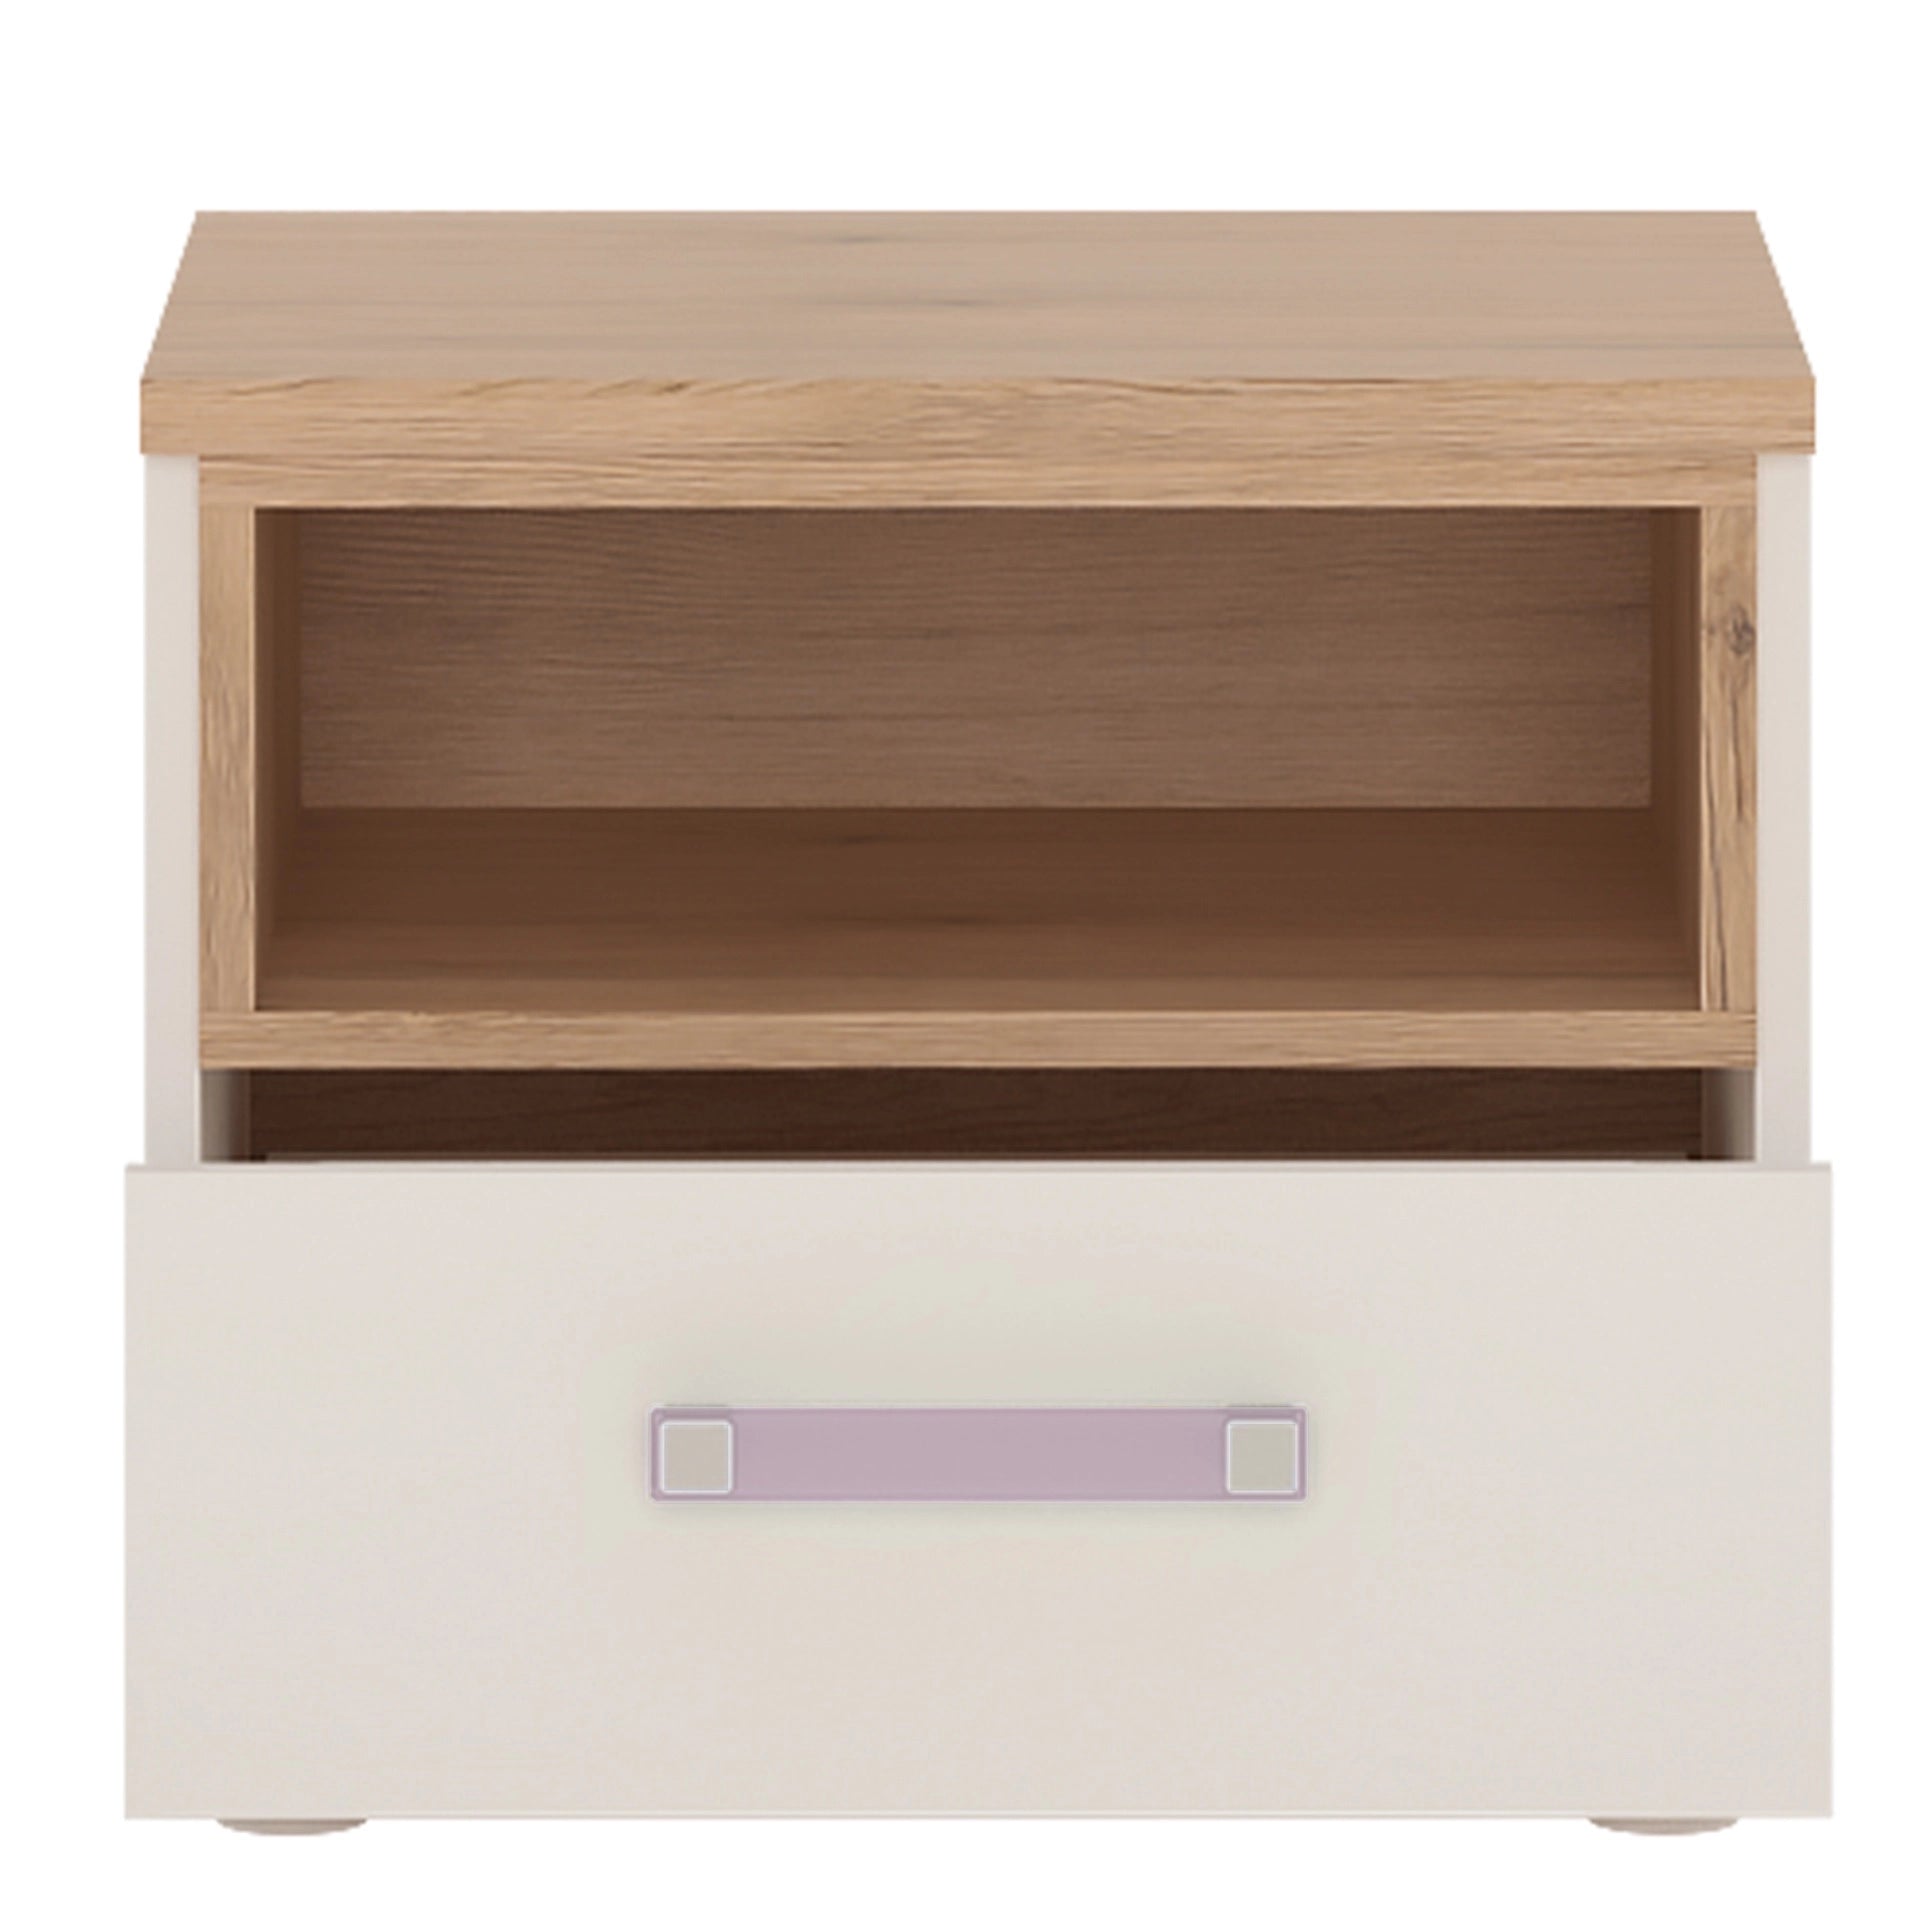 Furniture To Go 4Kids 1 Drawer Bedside Cabinet in Light Oak & White High Gloss (Lilac Handles)